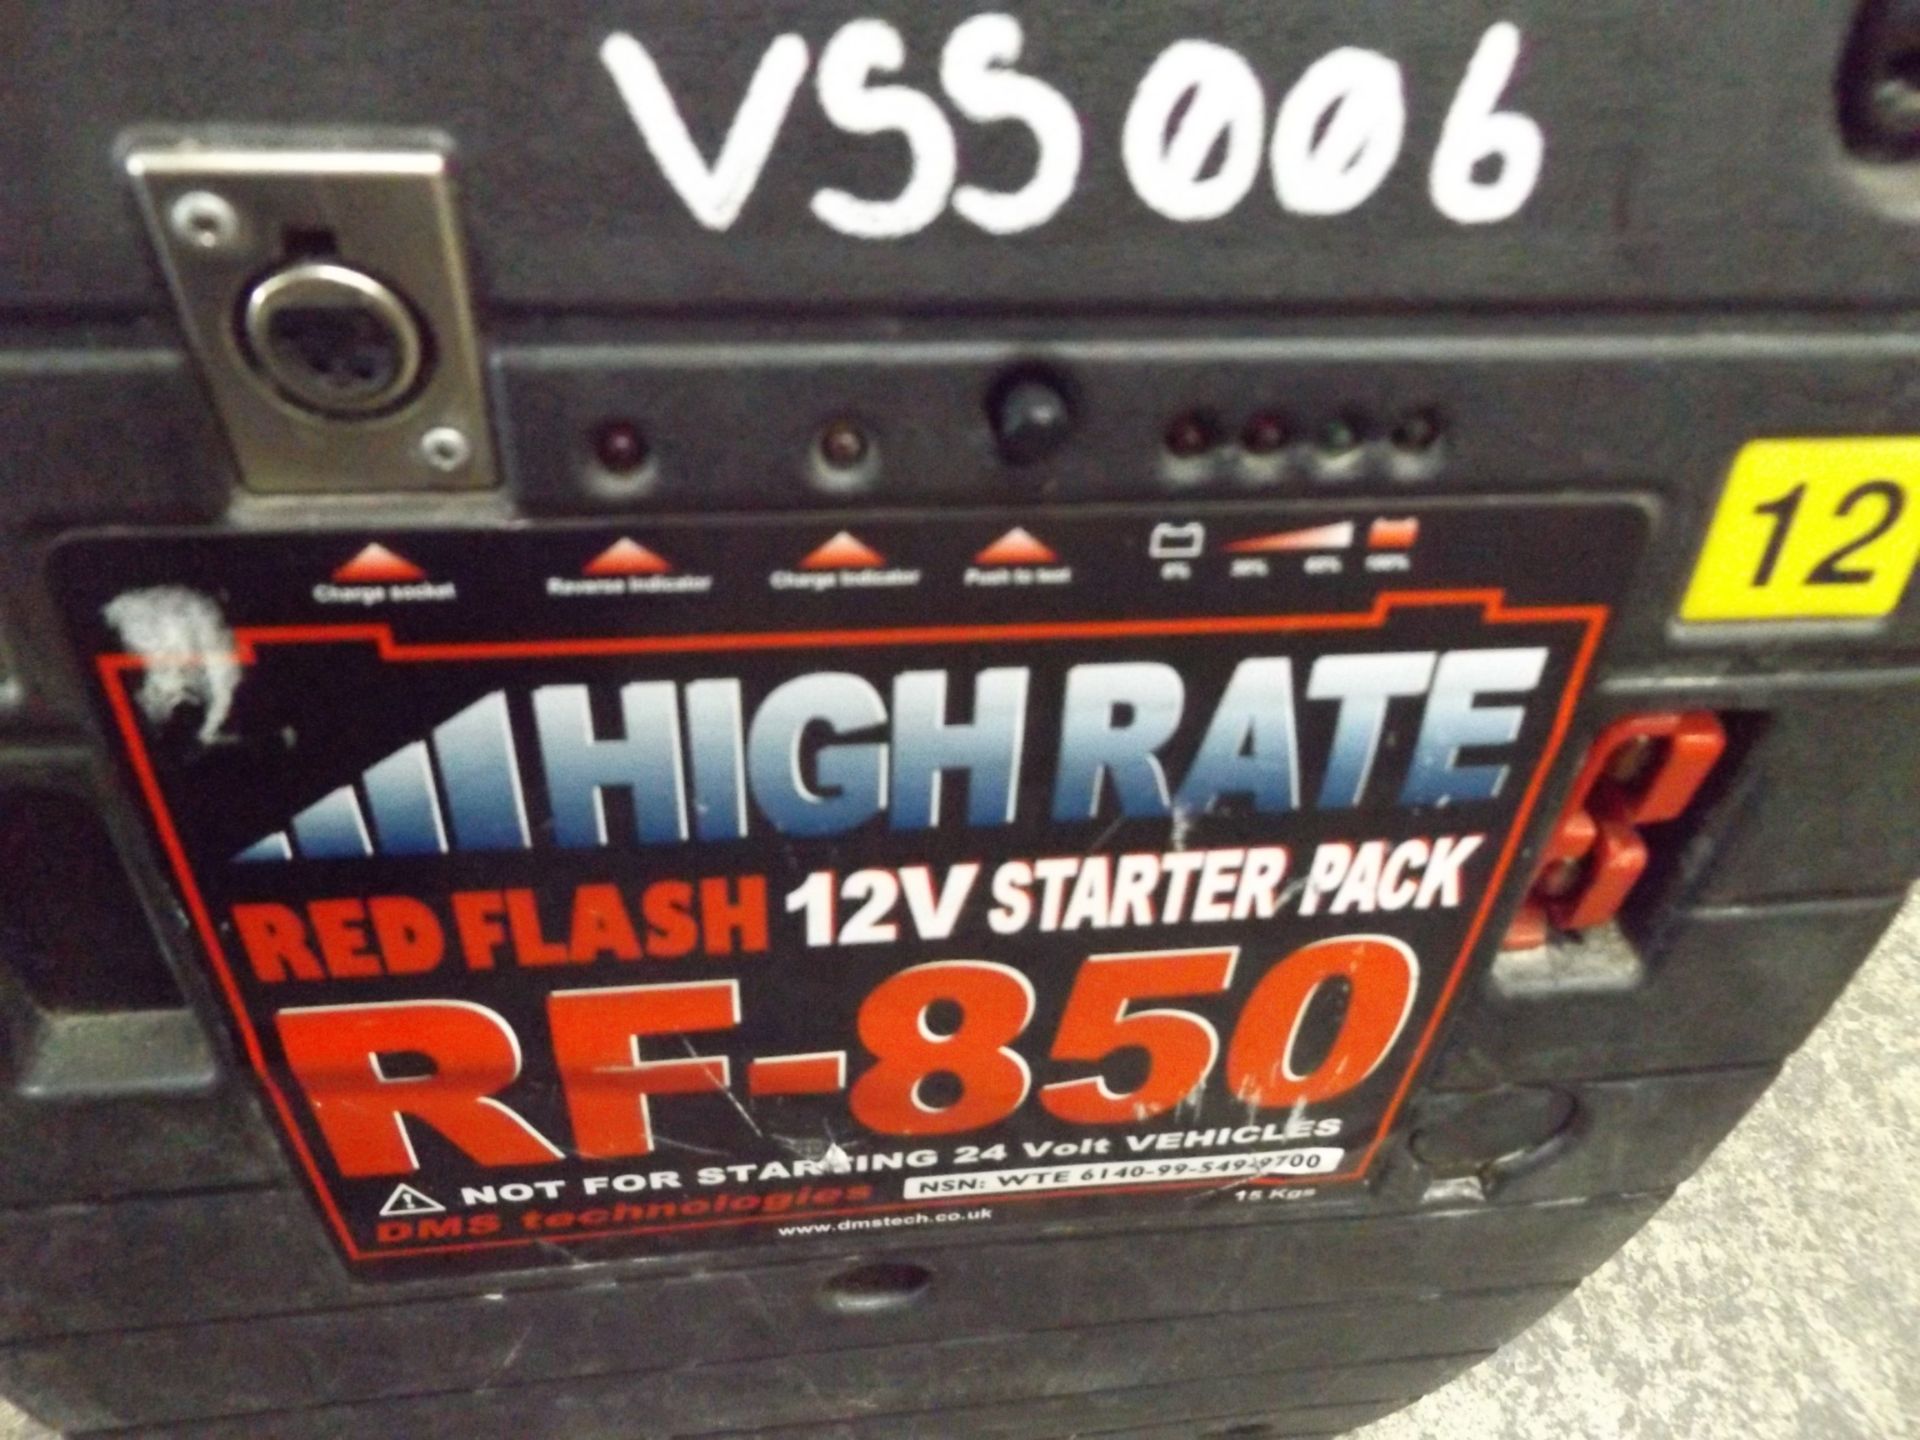 High Rate RF-850 12V Battery Pack - Image 3 of 3